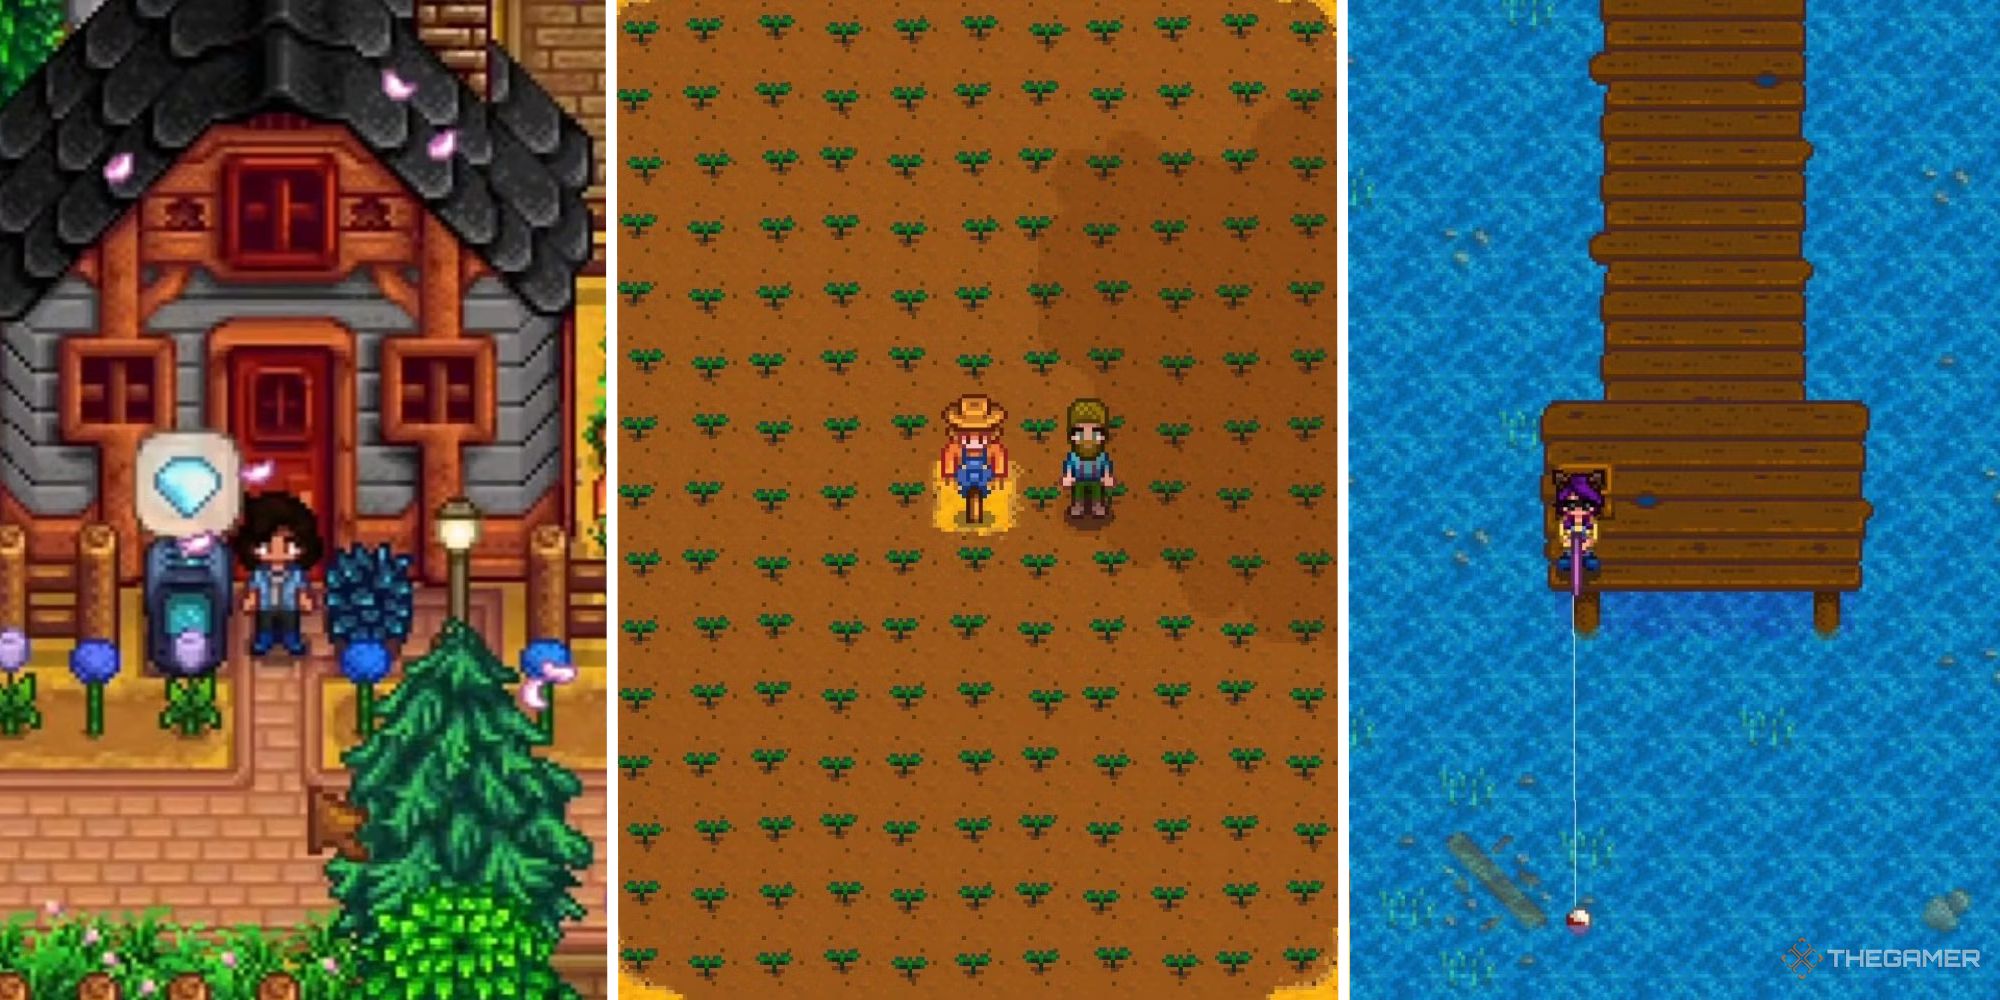 stardew split image of player outside shed, next to image of player in crop area and player fishing